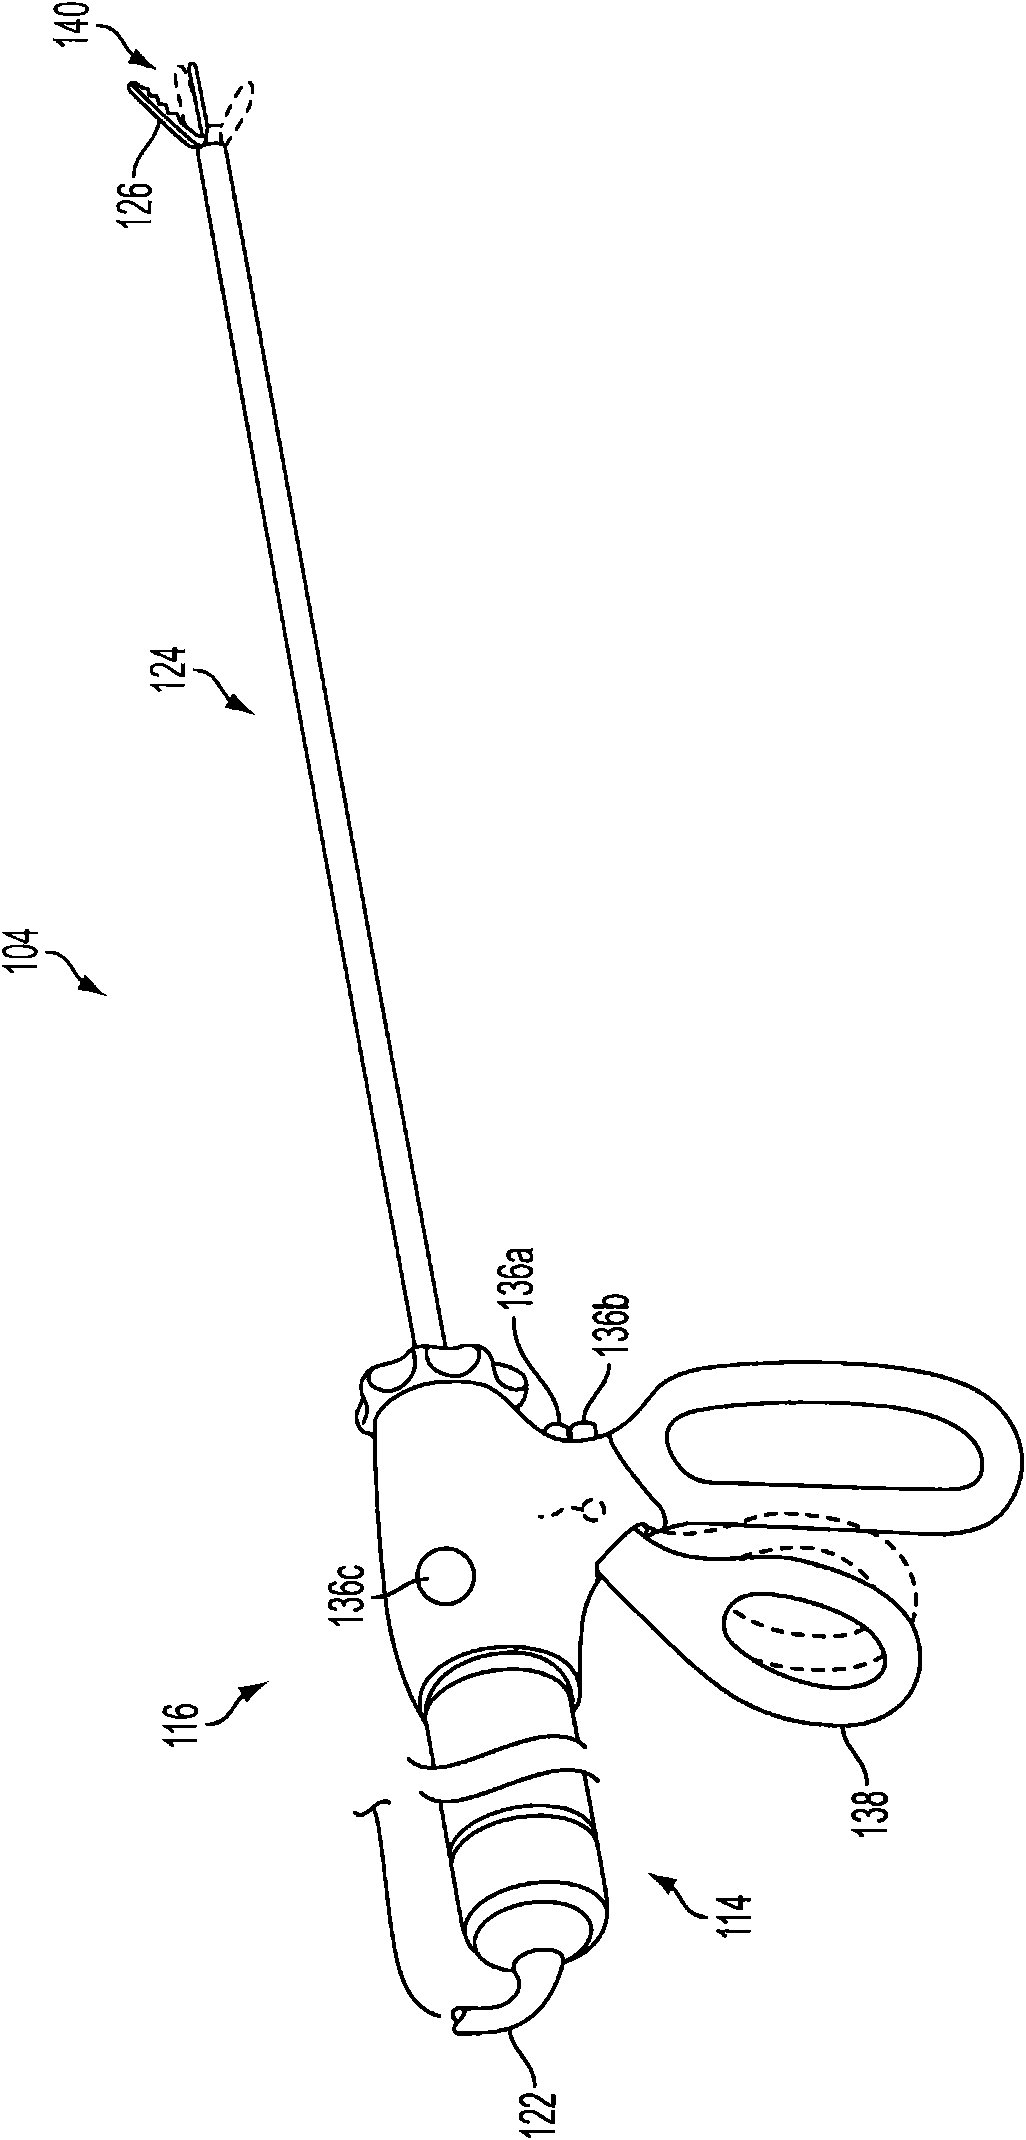 Surgical generator for ultrasonic and electrosurgical devices